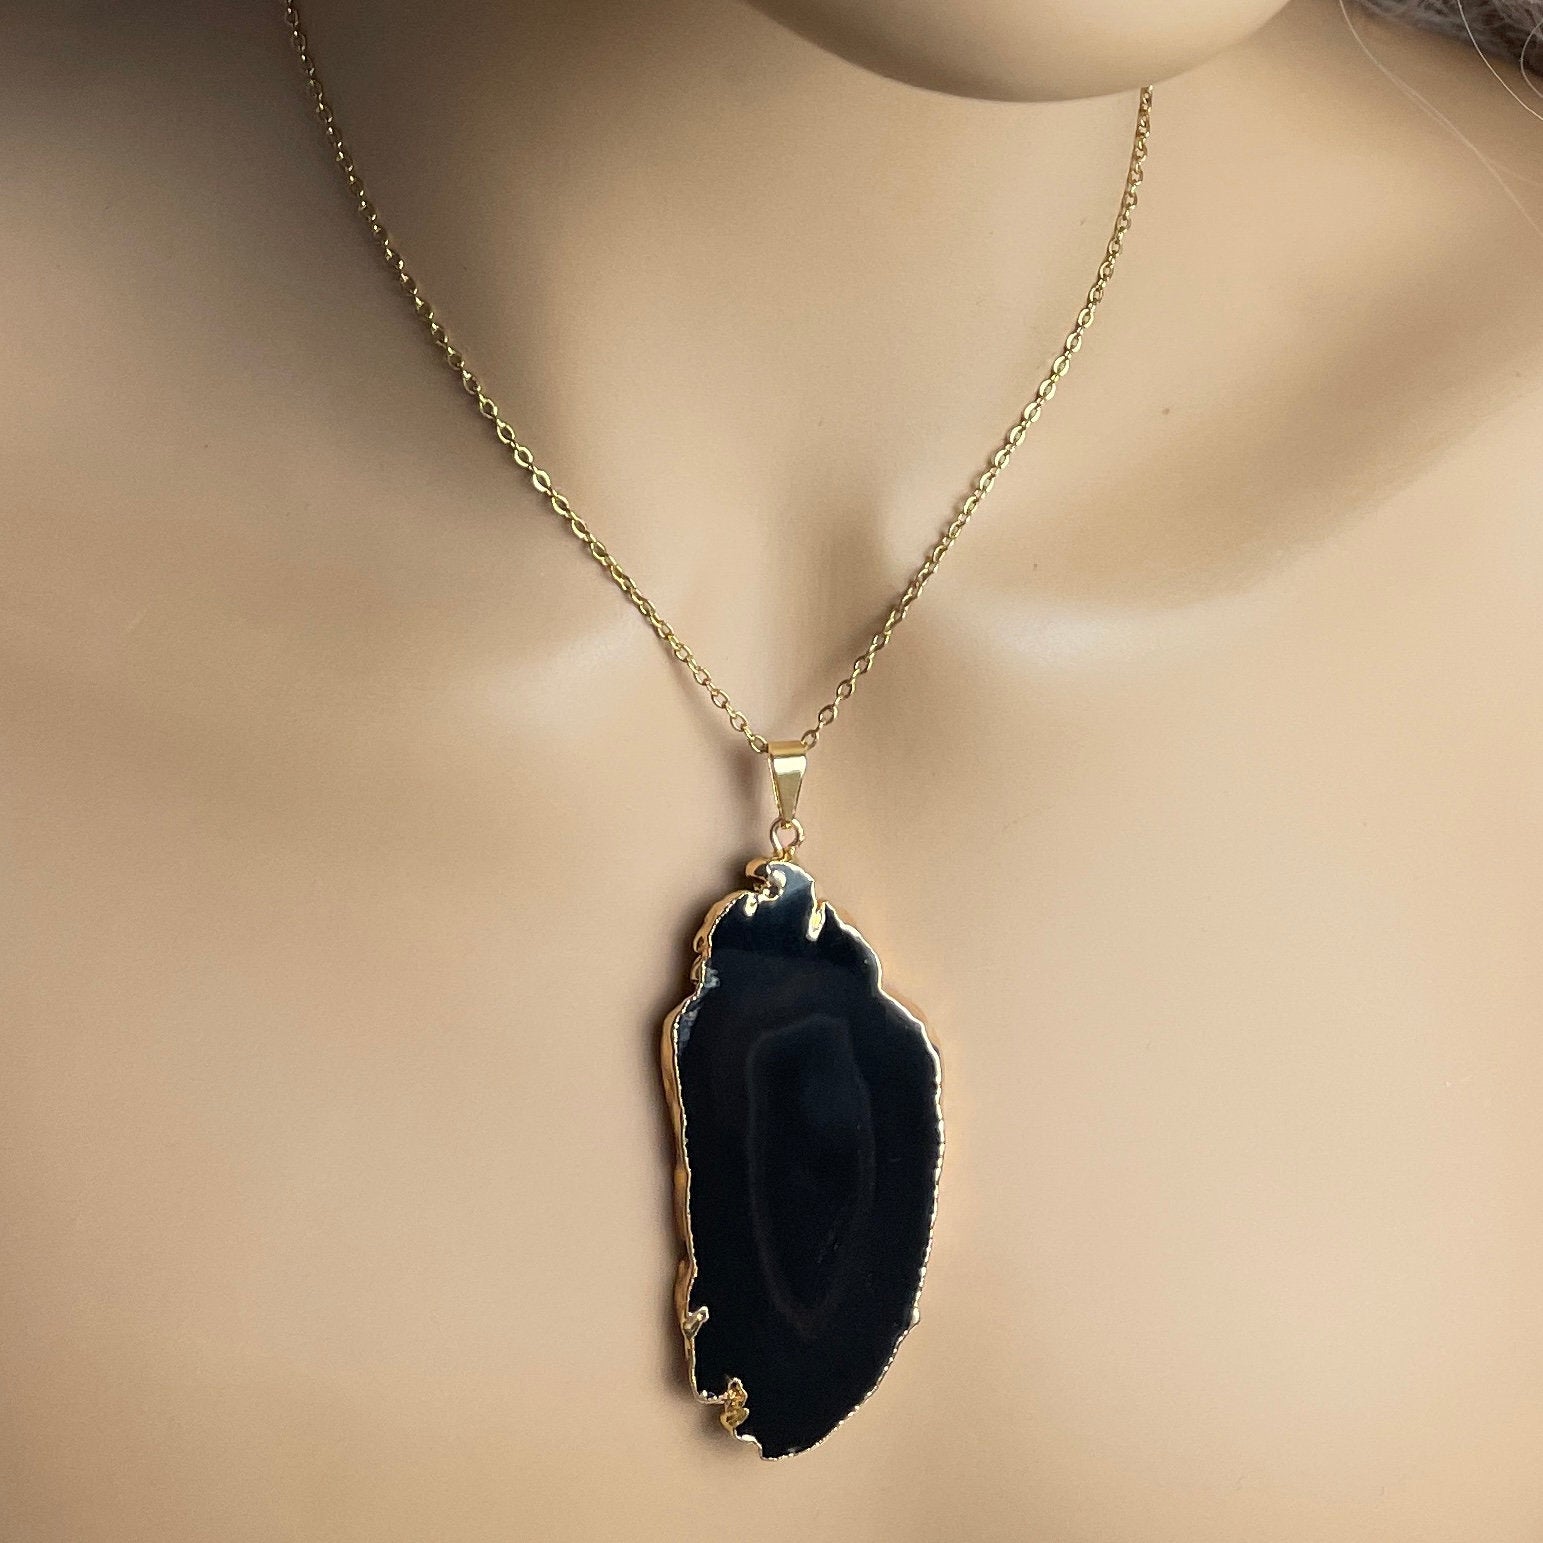 Large Black Agate Necklace Gold, Crystal Slice Pendant For Women, Gifts For Mom, G15-148